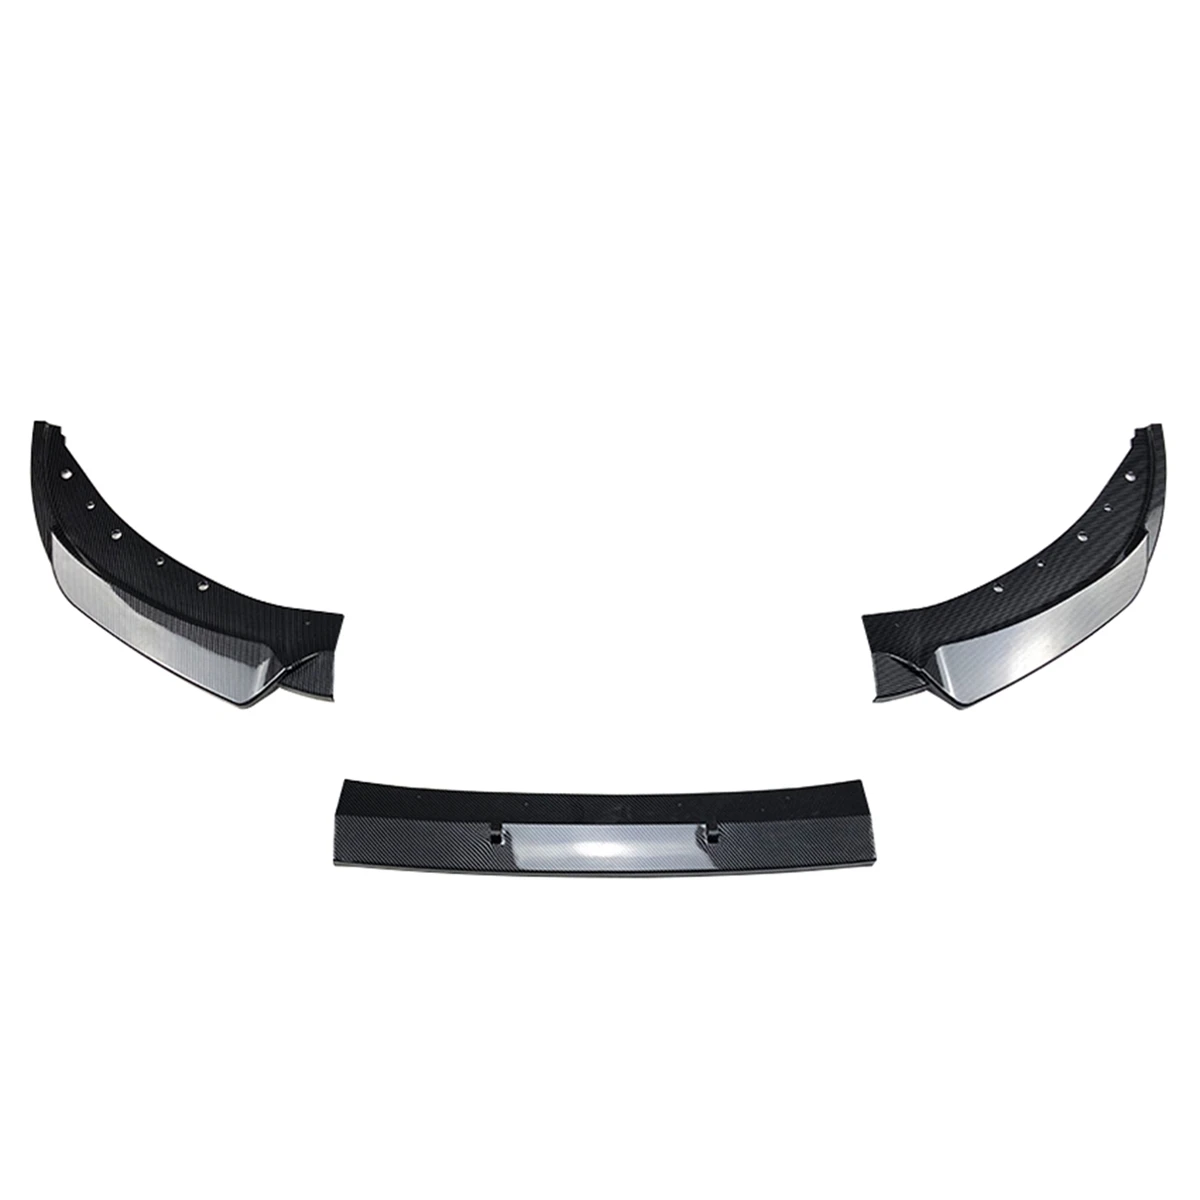 

3PCS Front Bumper Lip Splitter Kit Diffuser Spoiler for -BMW 3 Series G20 G21 Early Stage 320I 325I 2019-2022 Carbon